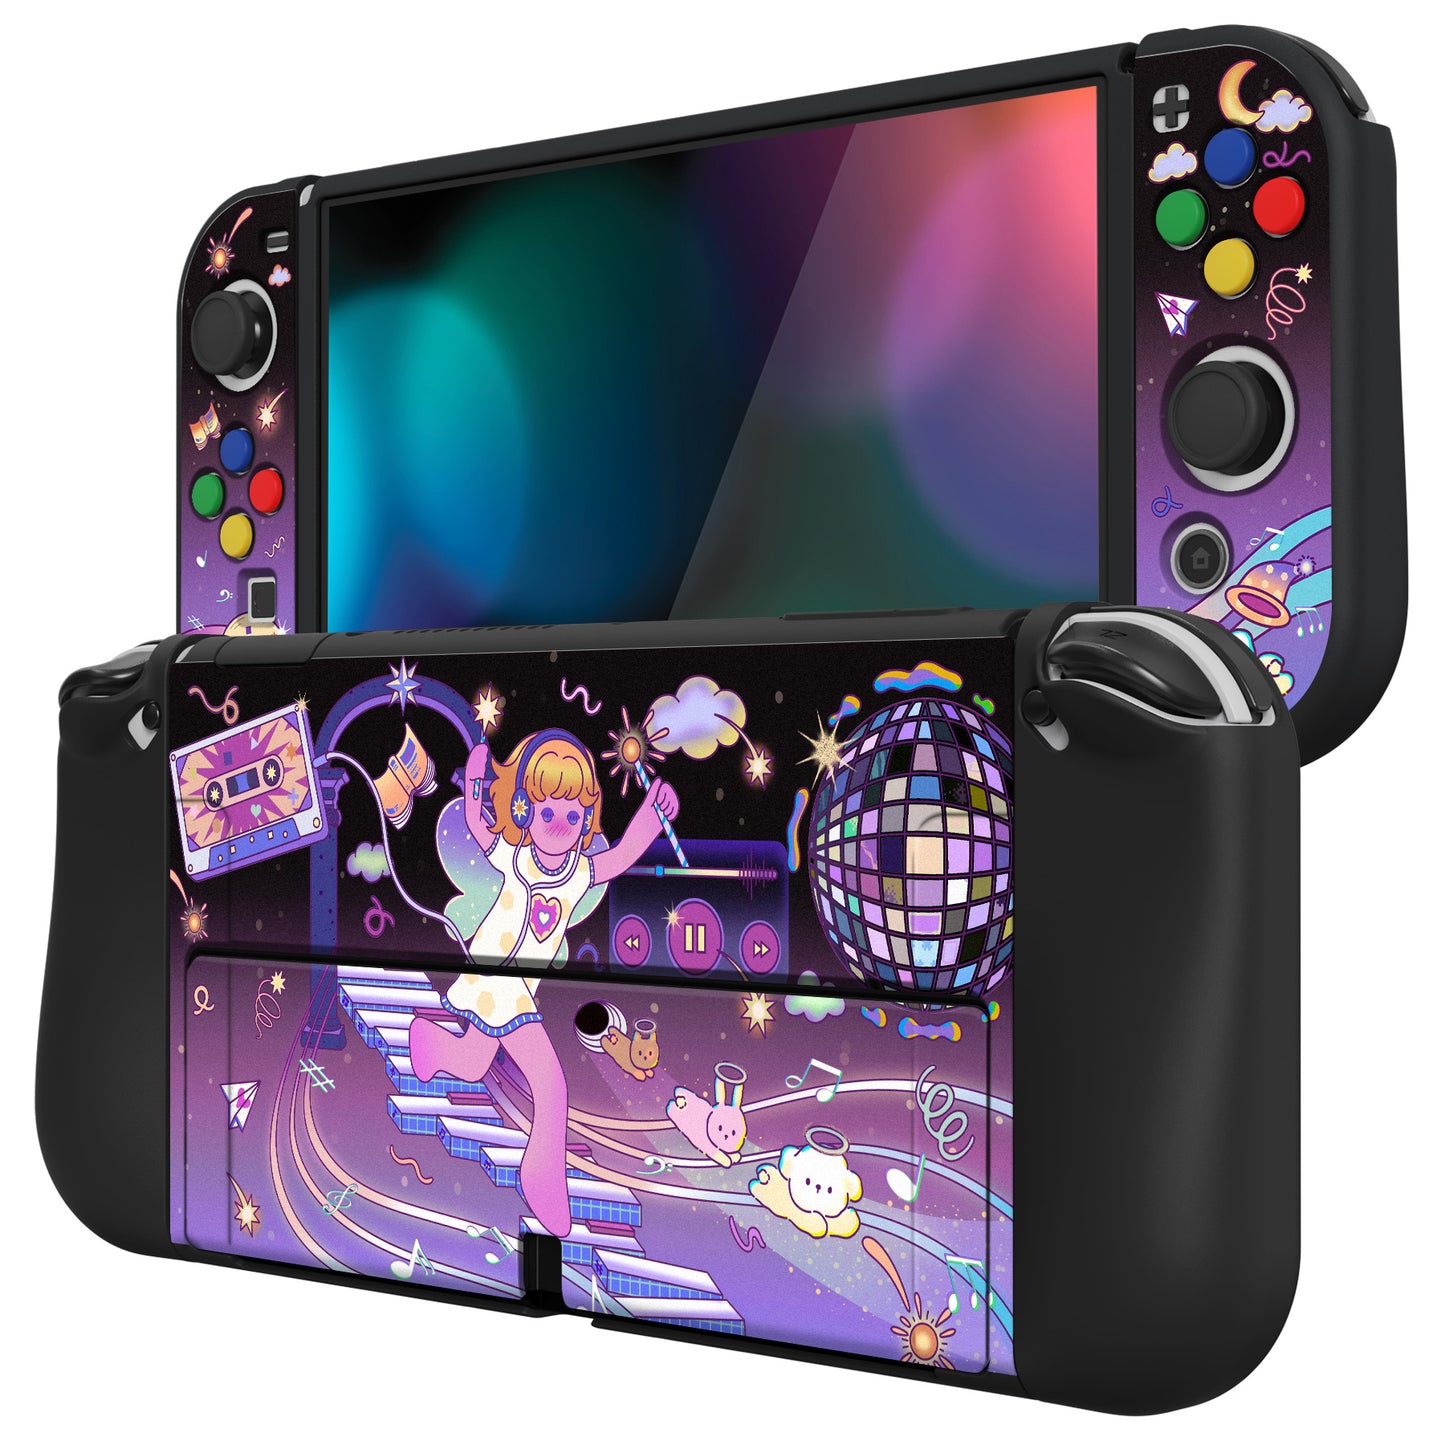 PlayVital ZealProtect Soft Protective Case for Switch OLED, Flexible Protector Joycon Grip Cover for Switch OLED with Thumb Grip Caps & ABXY Direction Button Caps - Dancing Notes - XSOYV6040 playvital